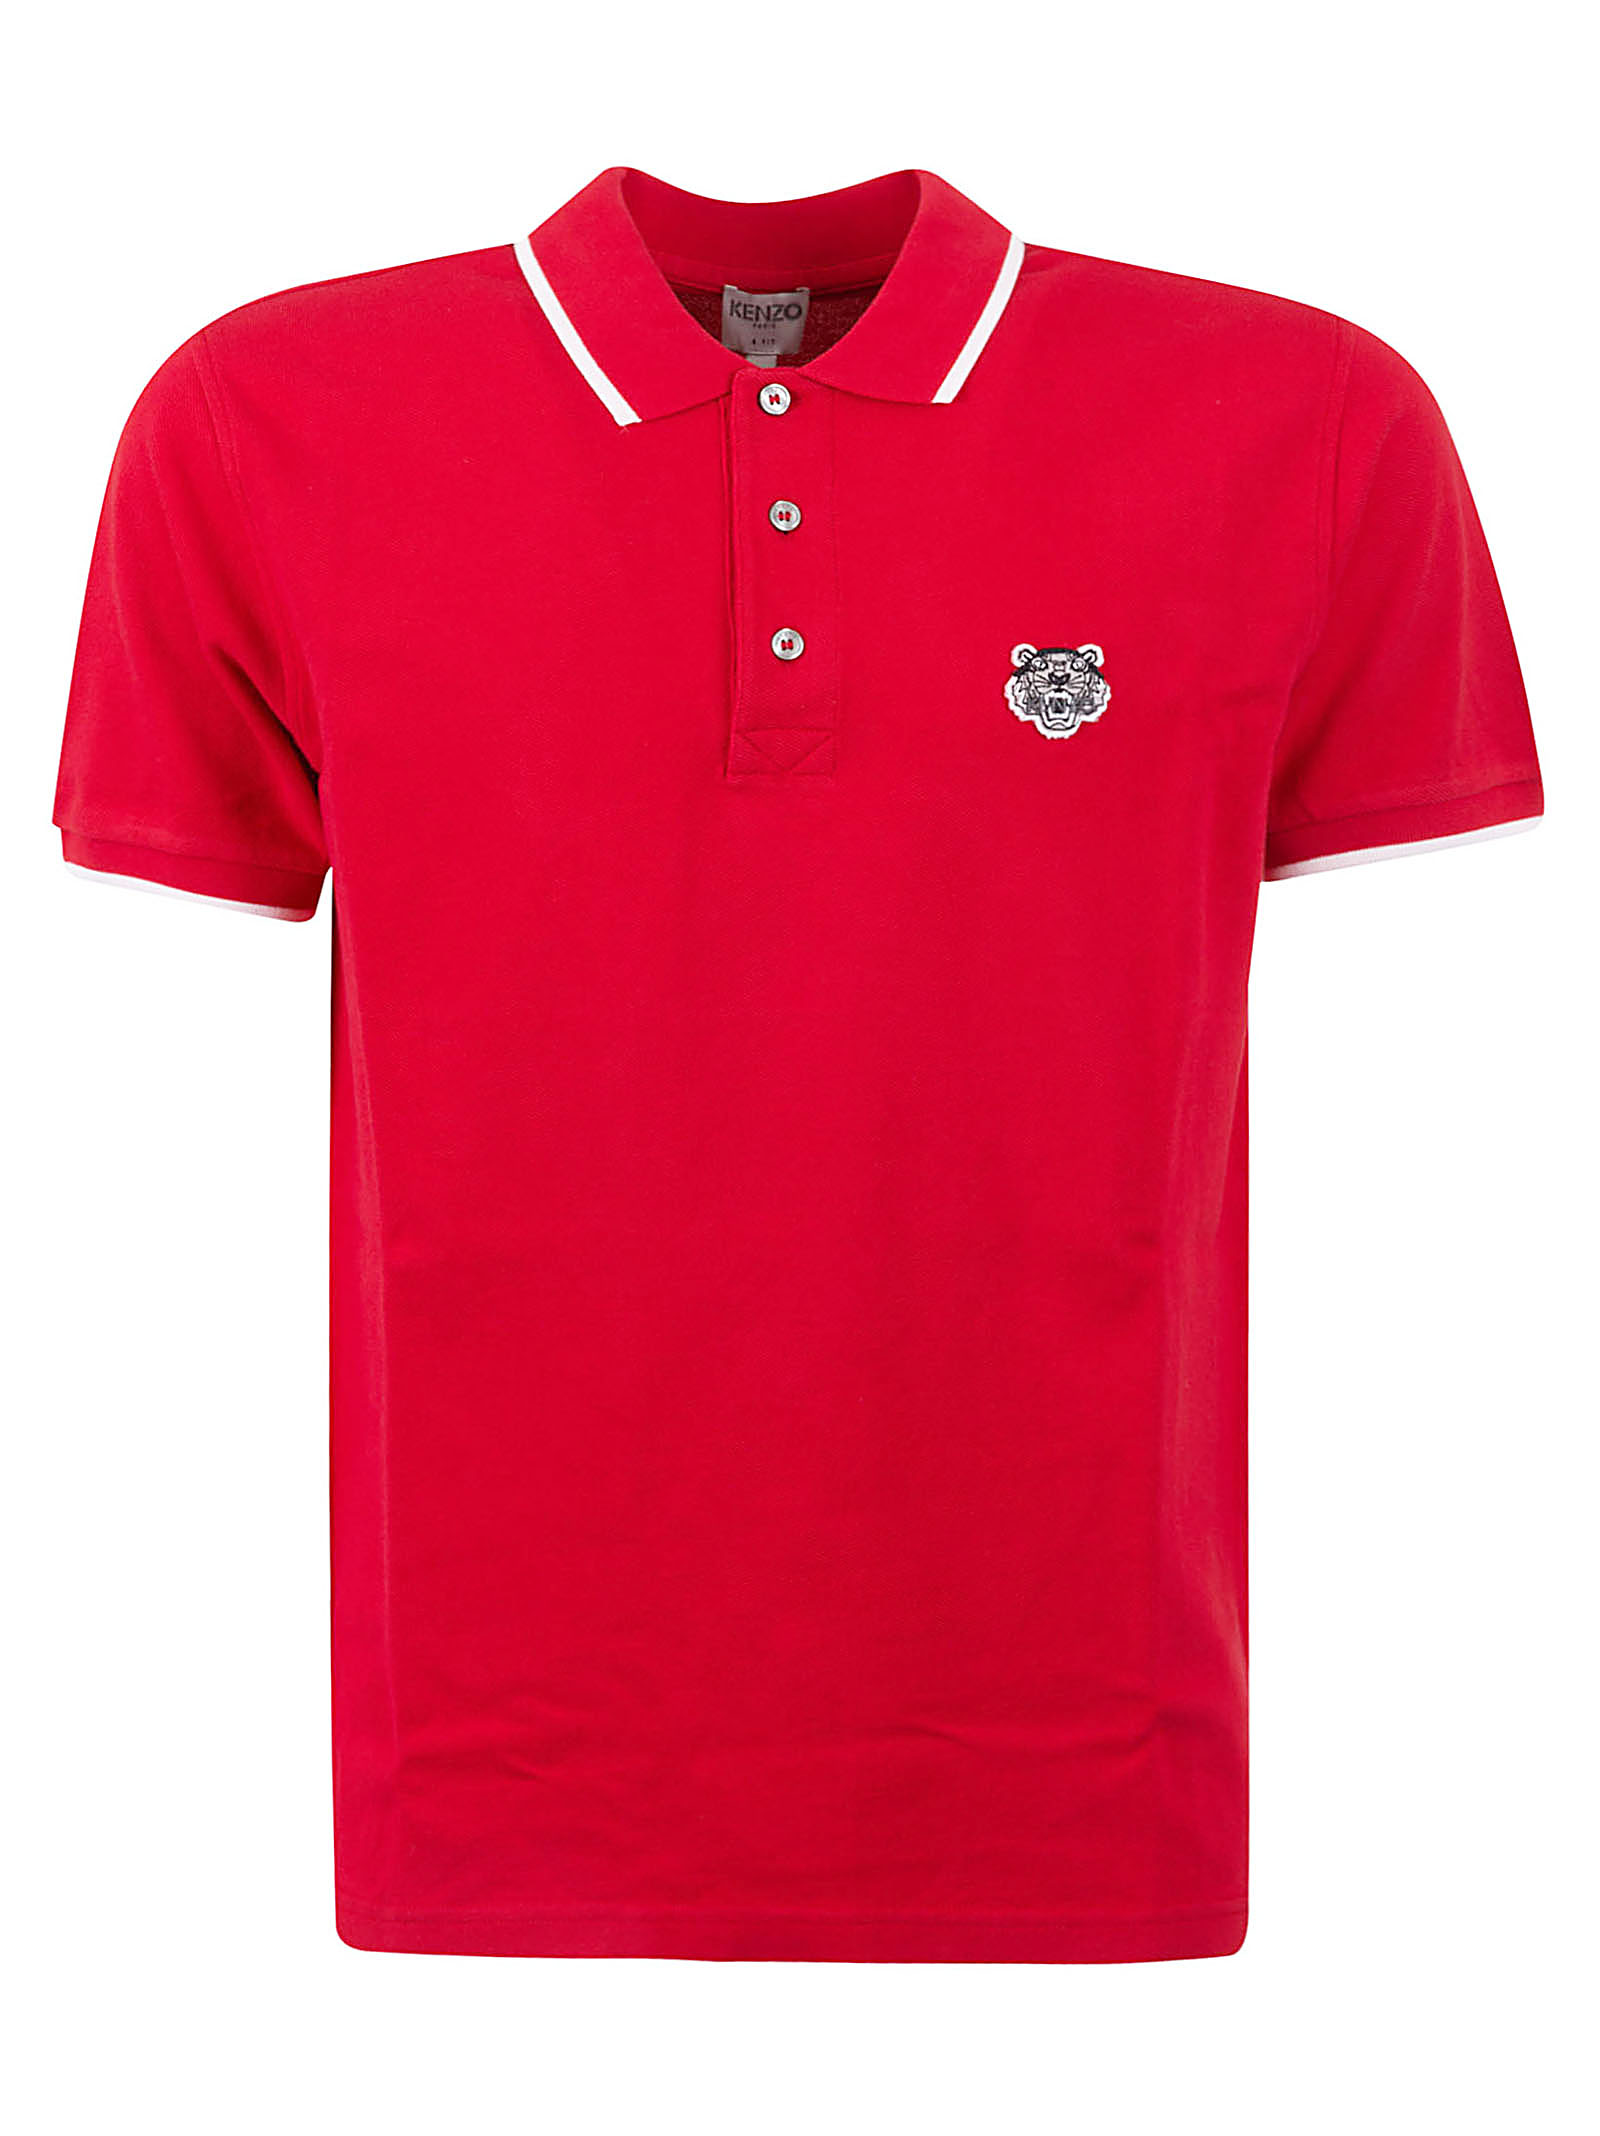 KENZO TIGER CREST FIT POLO SHIRT,11290341